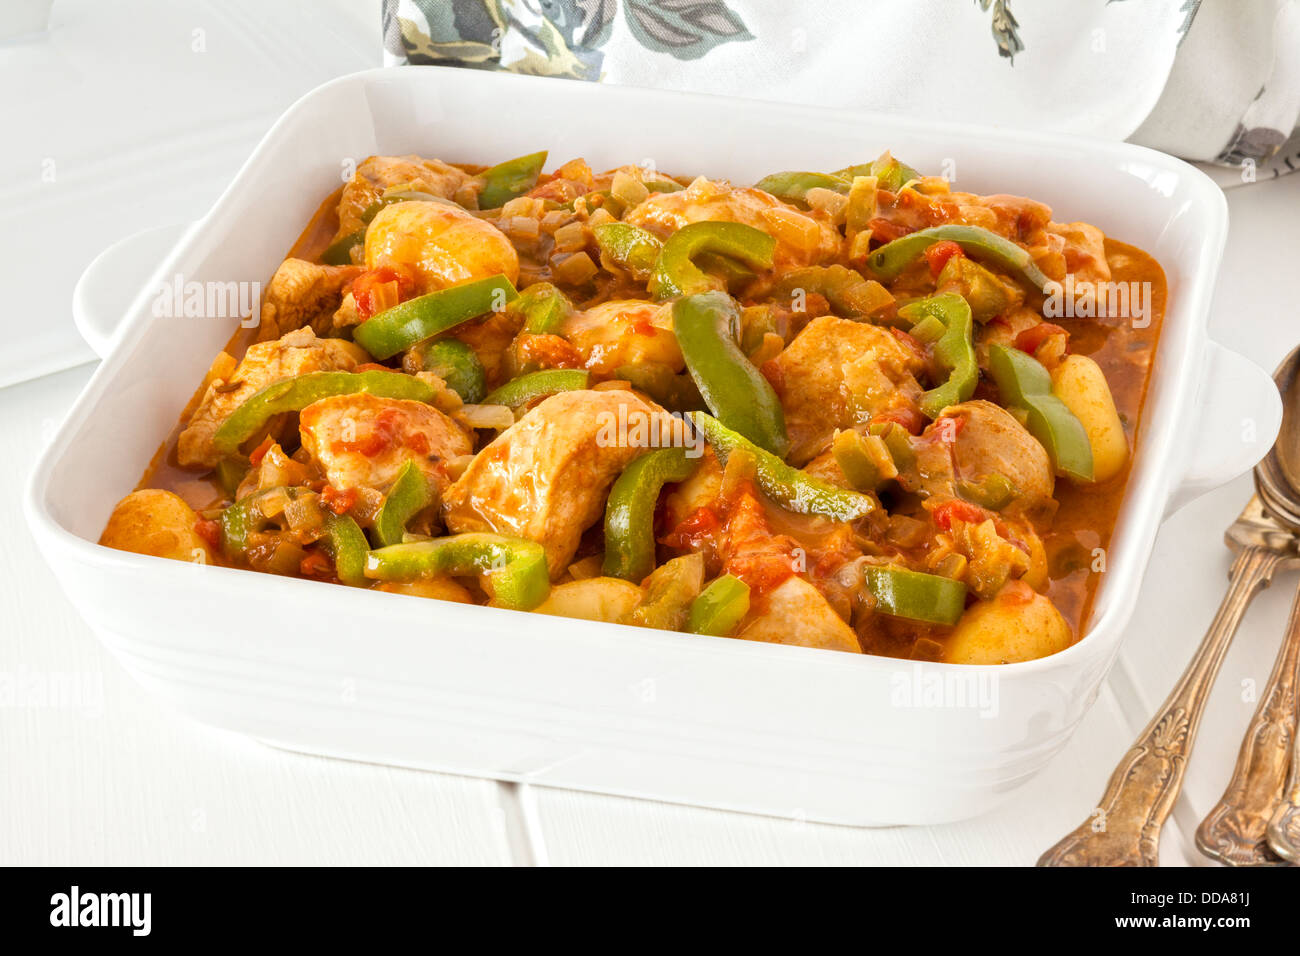 Chicken stew or goulash - chicken breast cooked with onions, paprika, potatoes and green peppers, in a creamy tomato sauce. Stock Photo